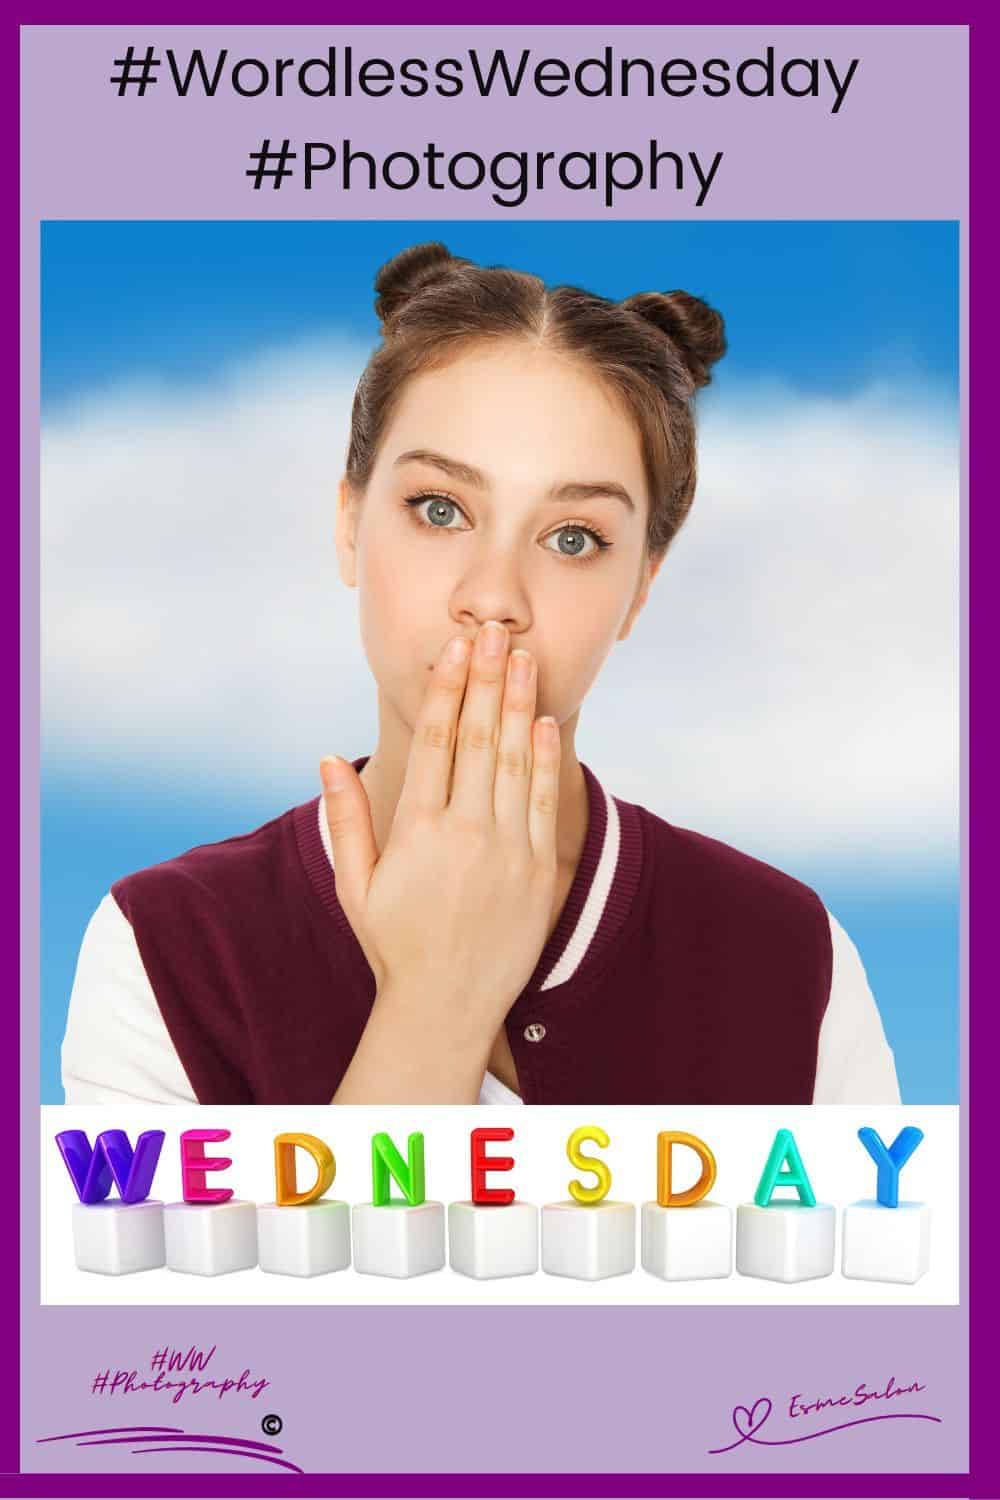 an image of a lady with her hand in front of her mouth and the word Wednesday below in color